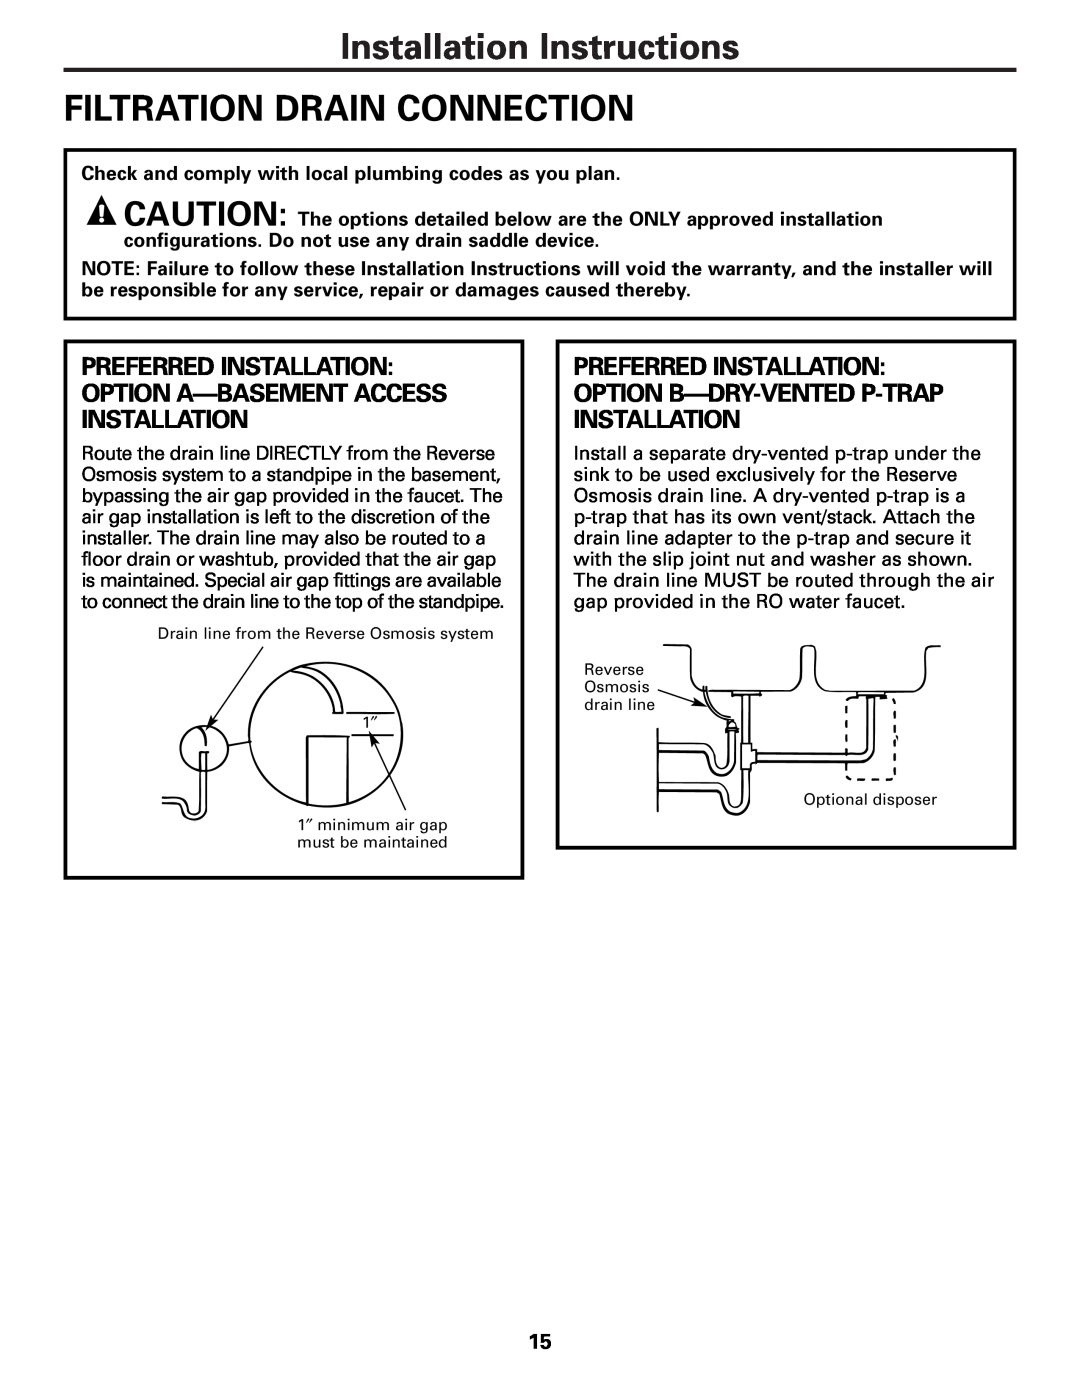 GE PNRQ21LRB Installation Instructions FILTRATION DRAIN CONNECTION, Check and comply with local plumbing codes as you plan 